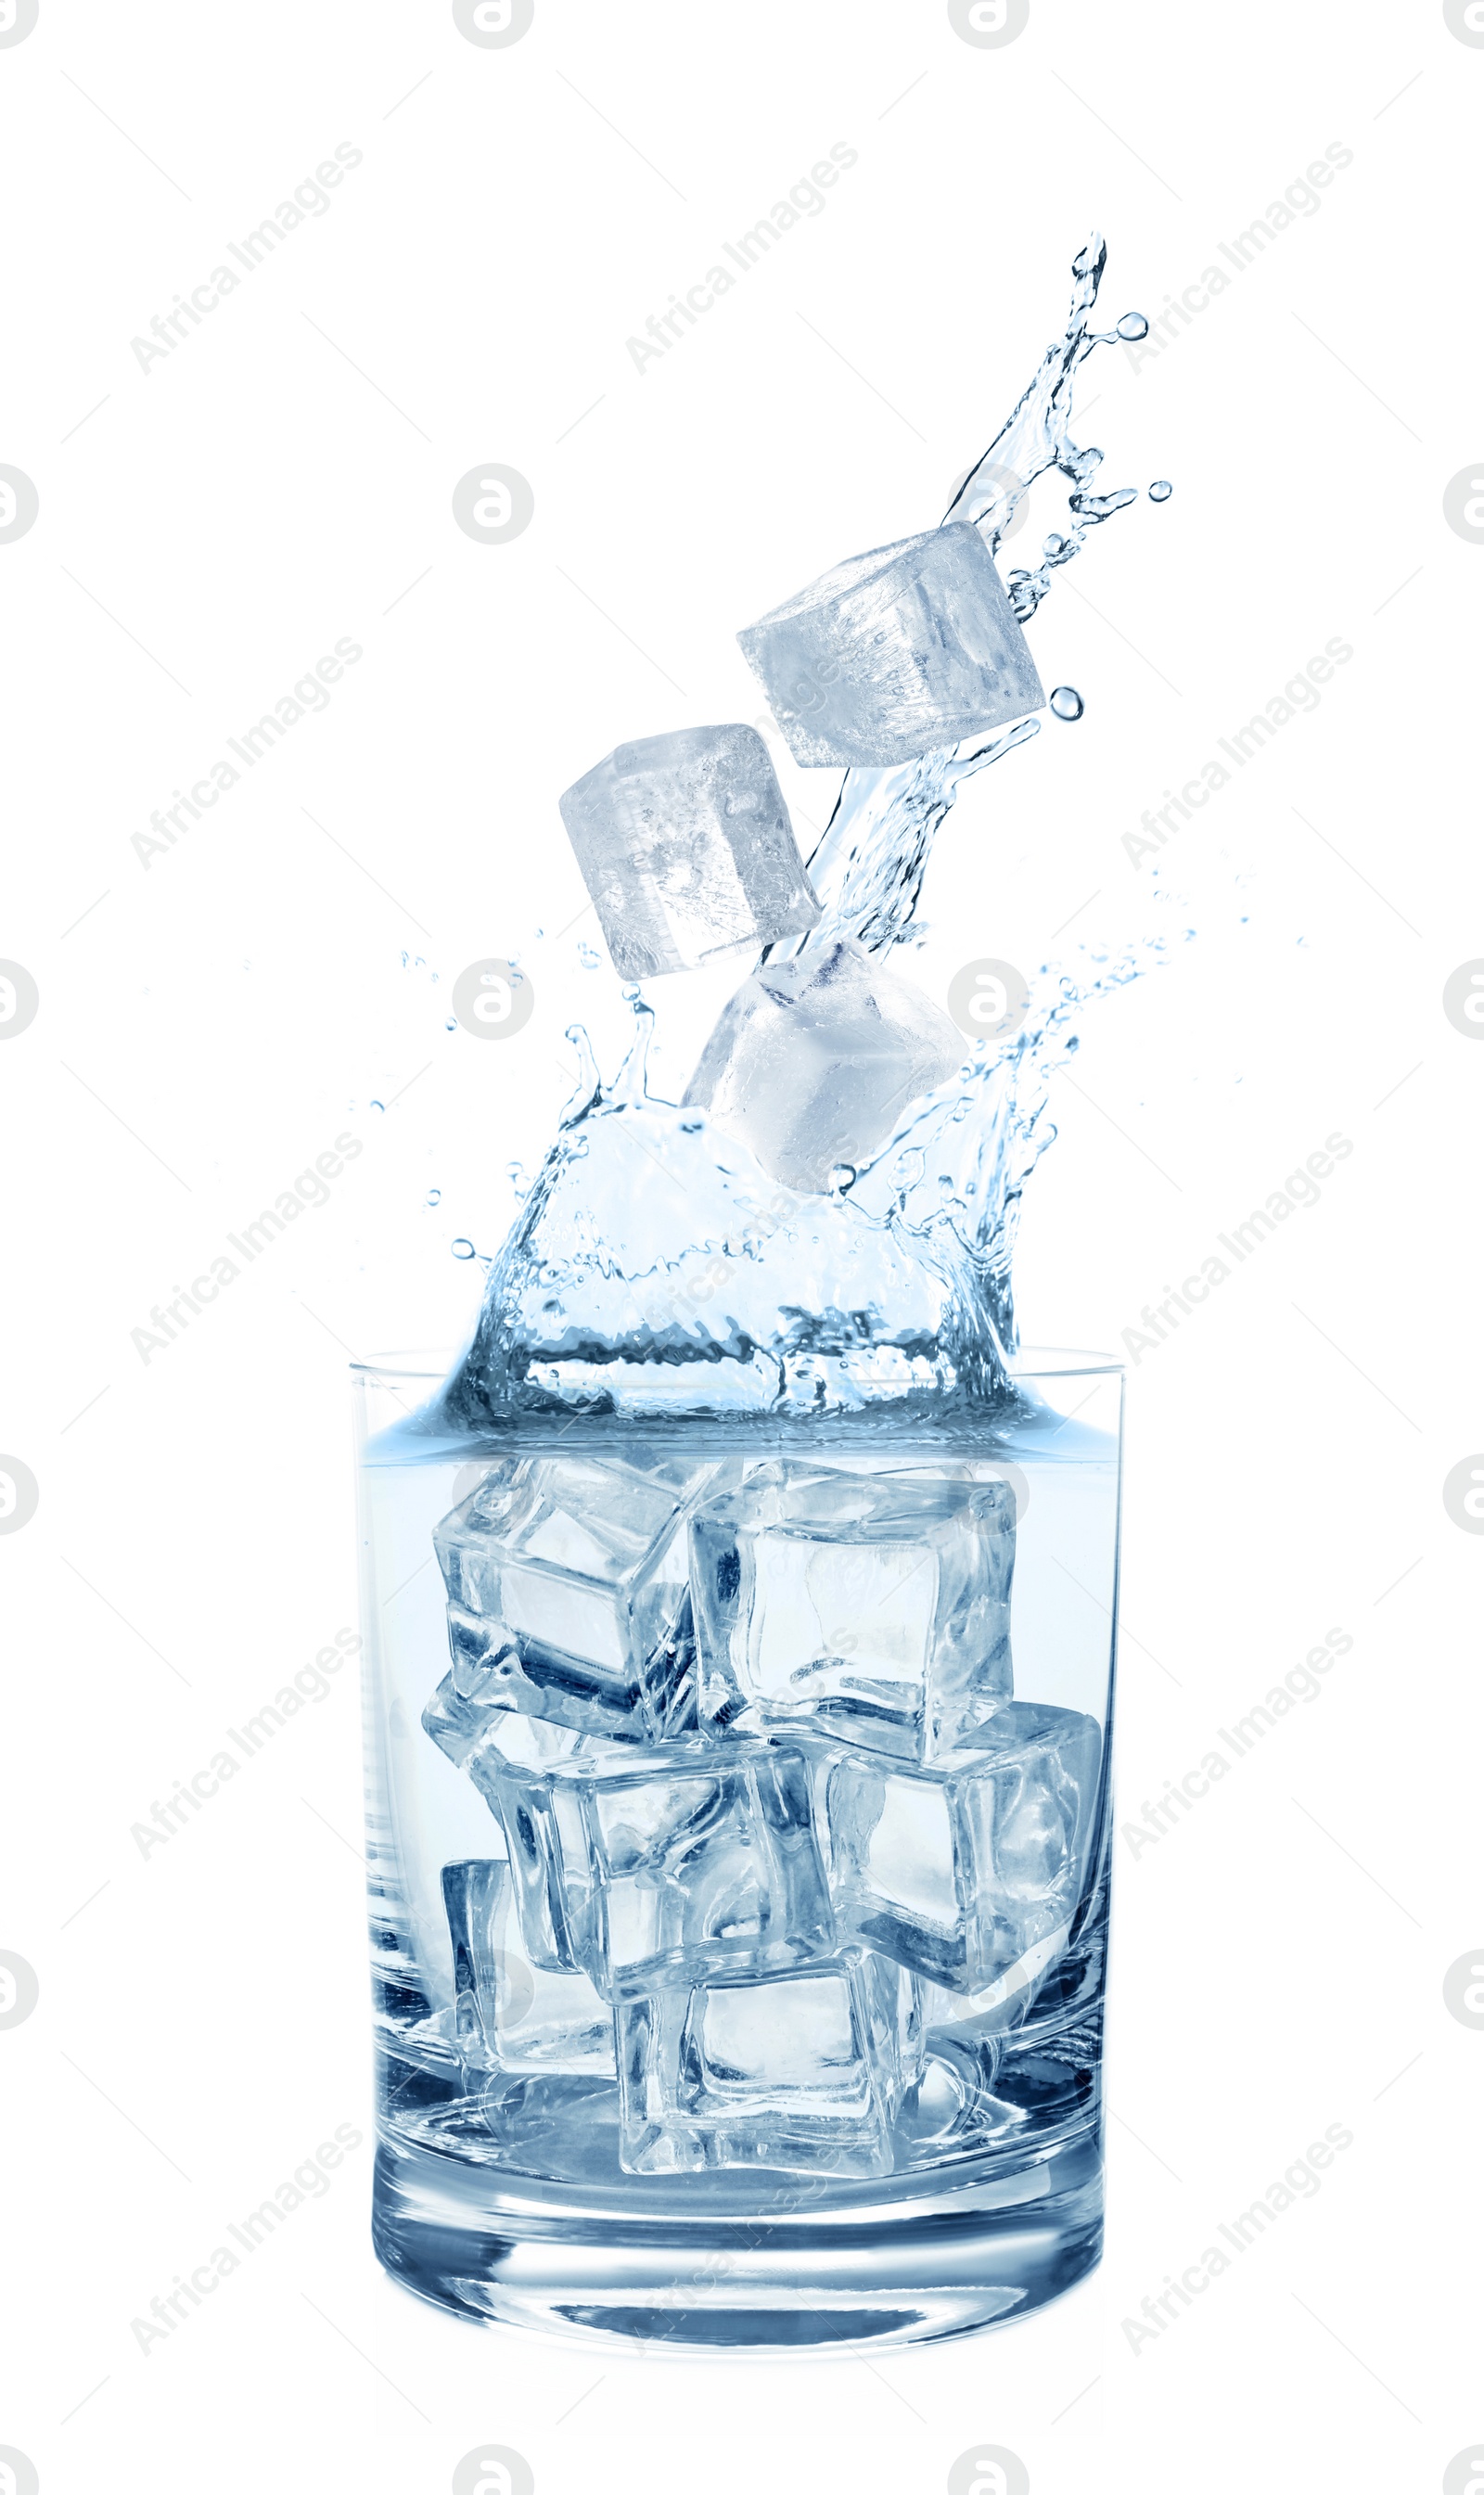 Image of  Water splashing out of glass with ice cubes on white background. Refreshing drink